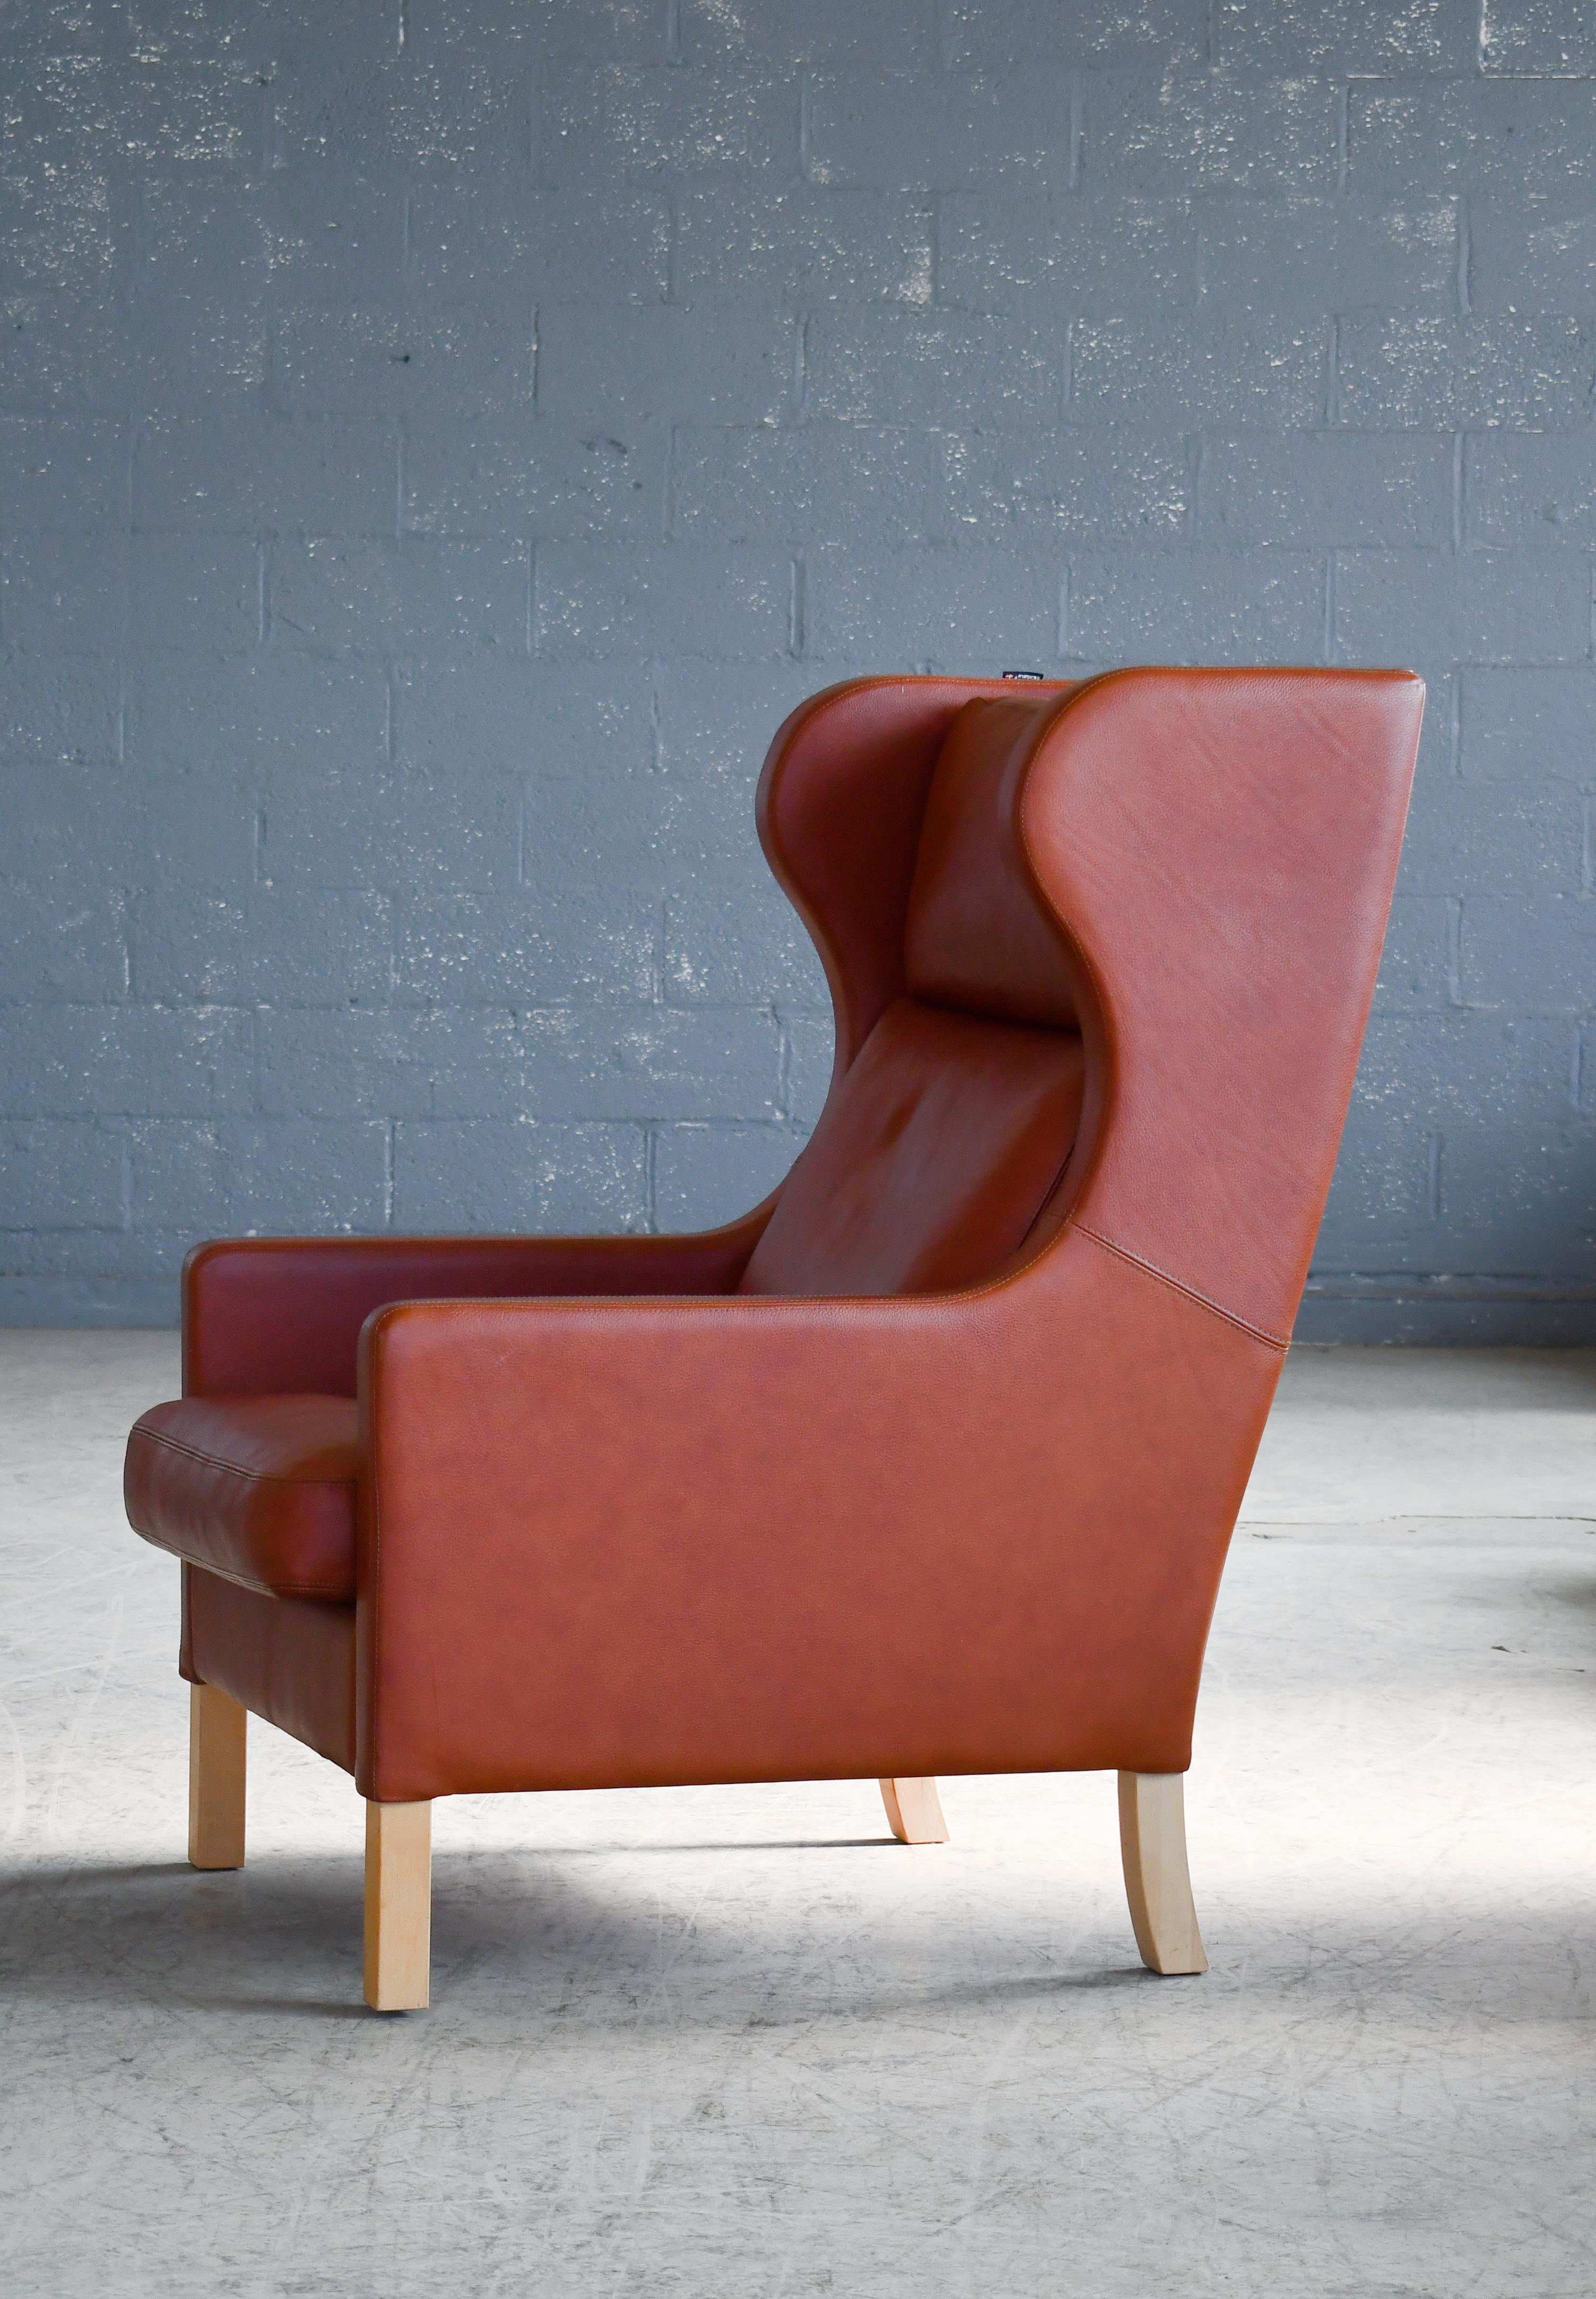 Mid-20th Century Danish Borge Mogensen Style Highback Lounge Chair in Cognac Colored Leather  For Sale